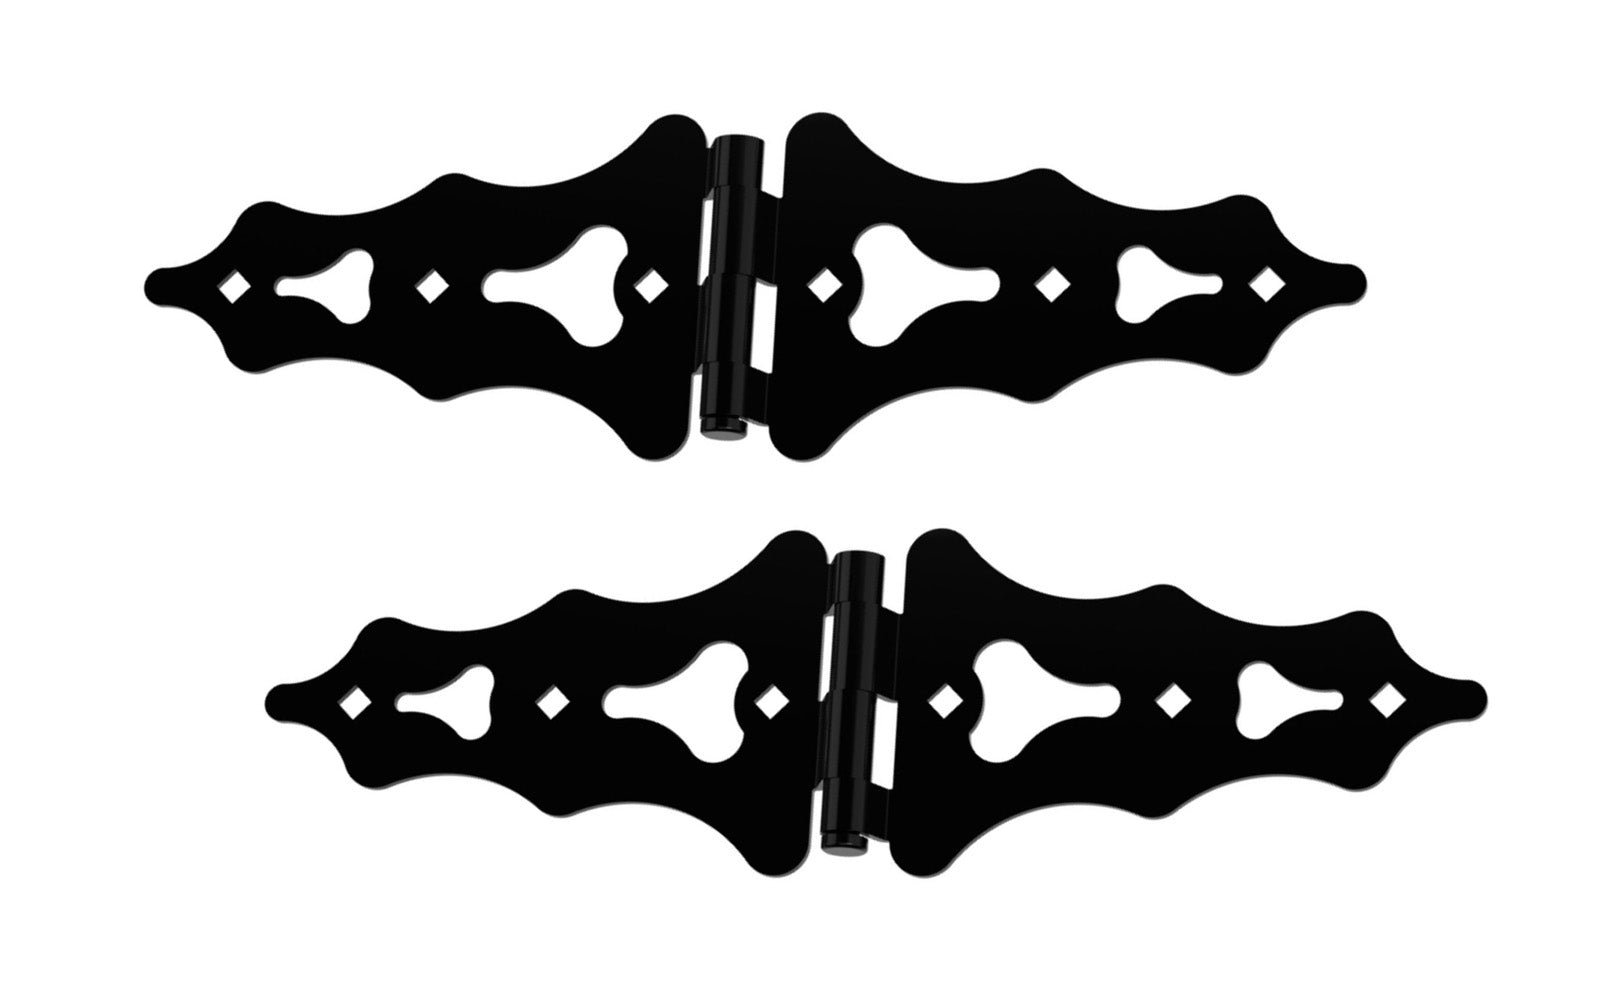 Black Finish Ornamental S-Hinges. Designed for gates, sheds, & rustic doors. Offset screw holes for extra strength & to prevent wood from splitting. Black finish for style & durability. Mounting hardware included for easy installation. For both left & right handed applications. National Hardware Model No. N166-011.